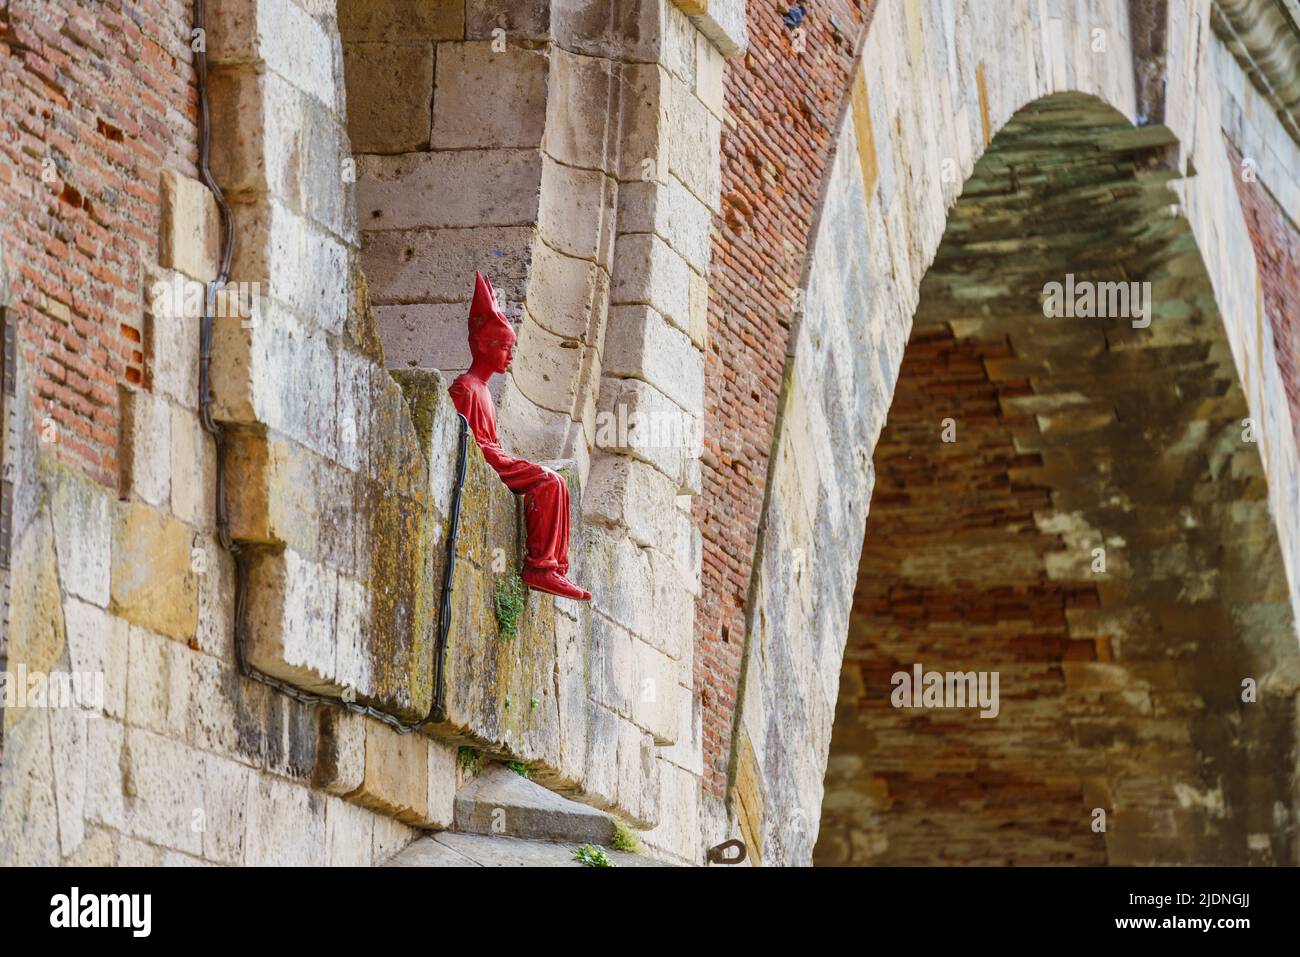 Toulouse, France. May 24, 2022. This little red man sculpture by French artists James Colomina located in the Pont-Neuf in Toulouse France. Stock Photo